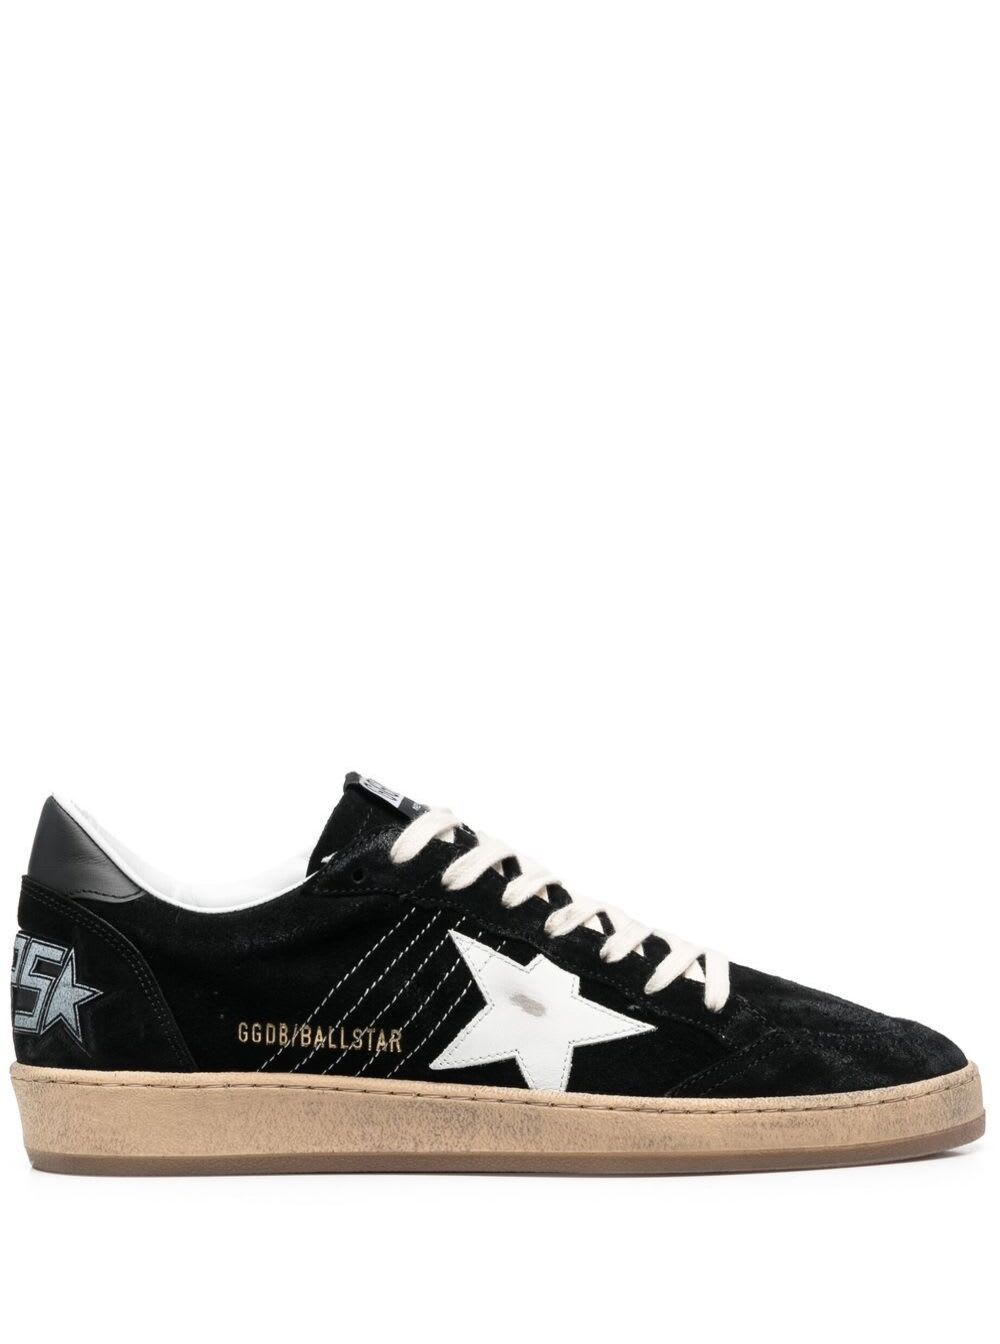 Golden Goose Black Suede Ballstar Low Top Sneakers With Logo In Leather Man